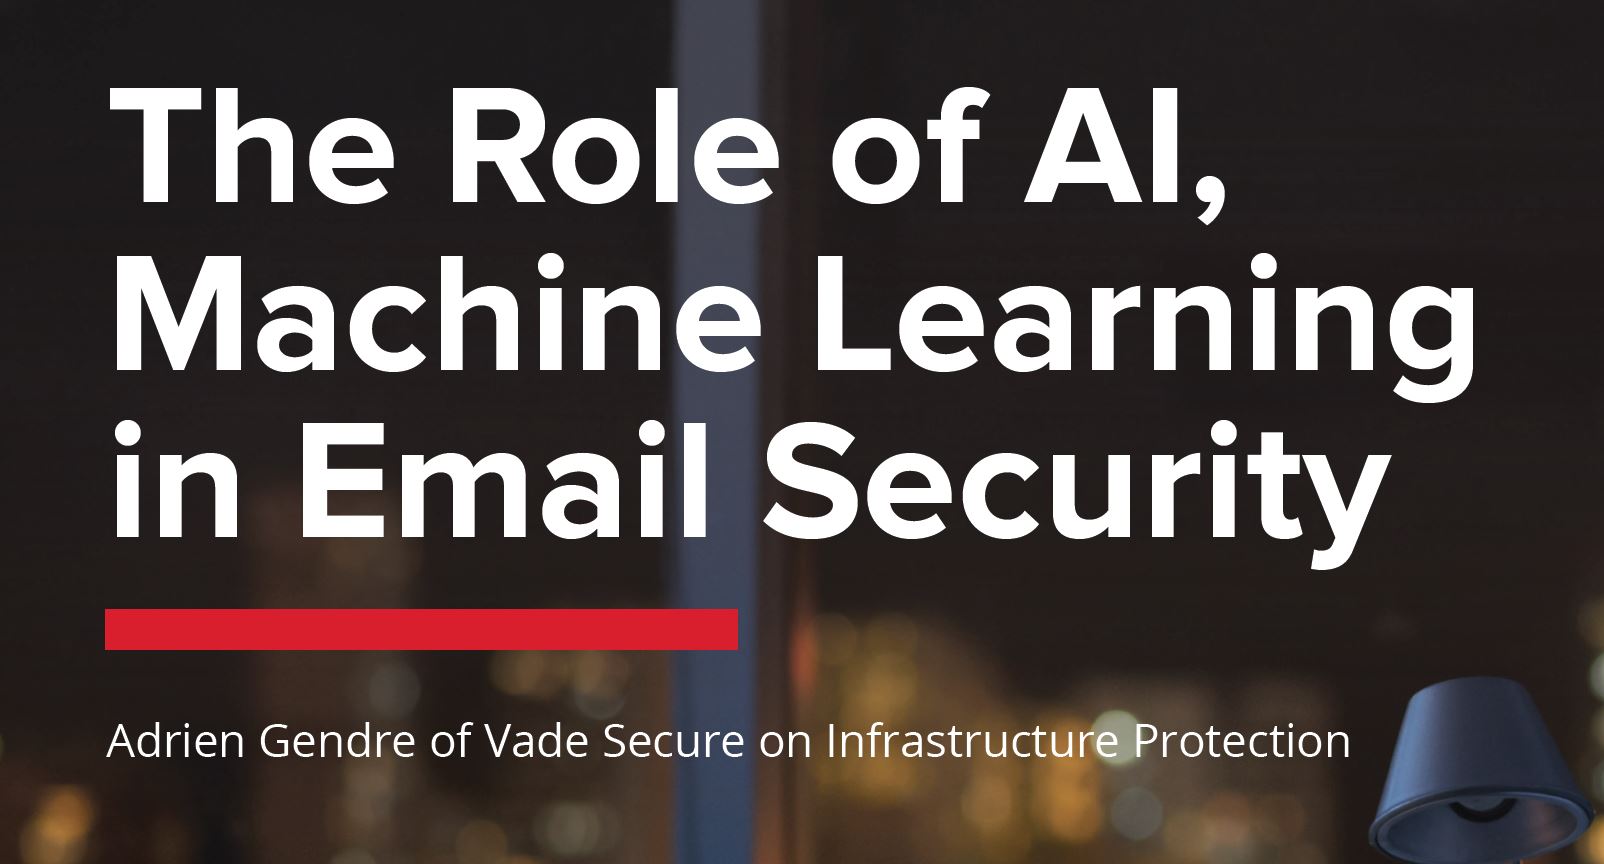 The Role of AI & Machine Learning in Email Security